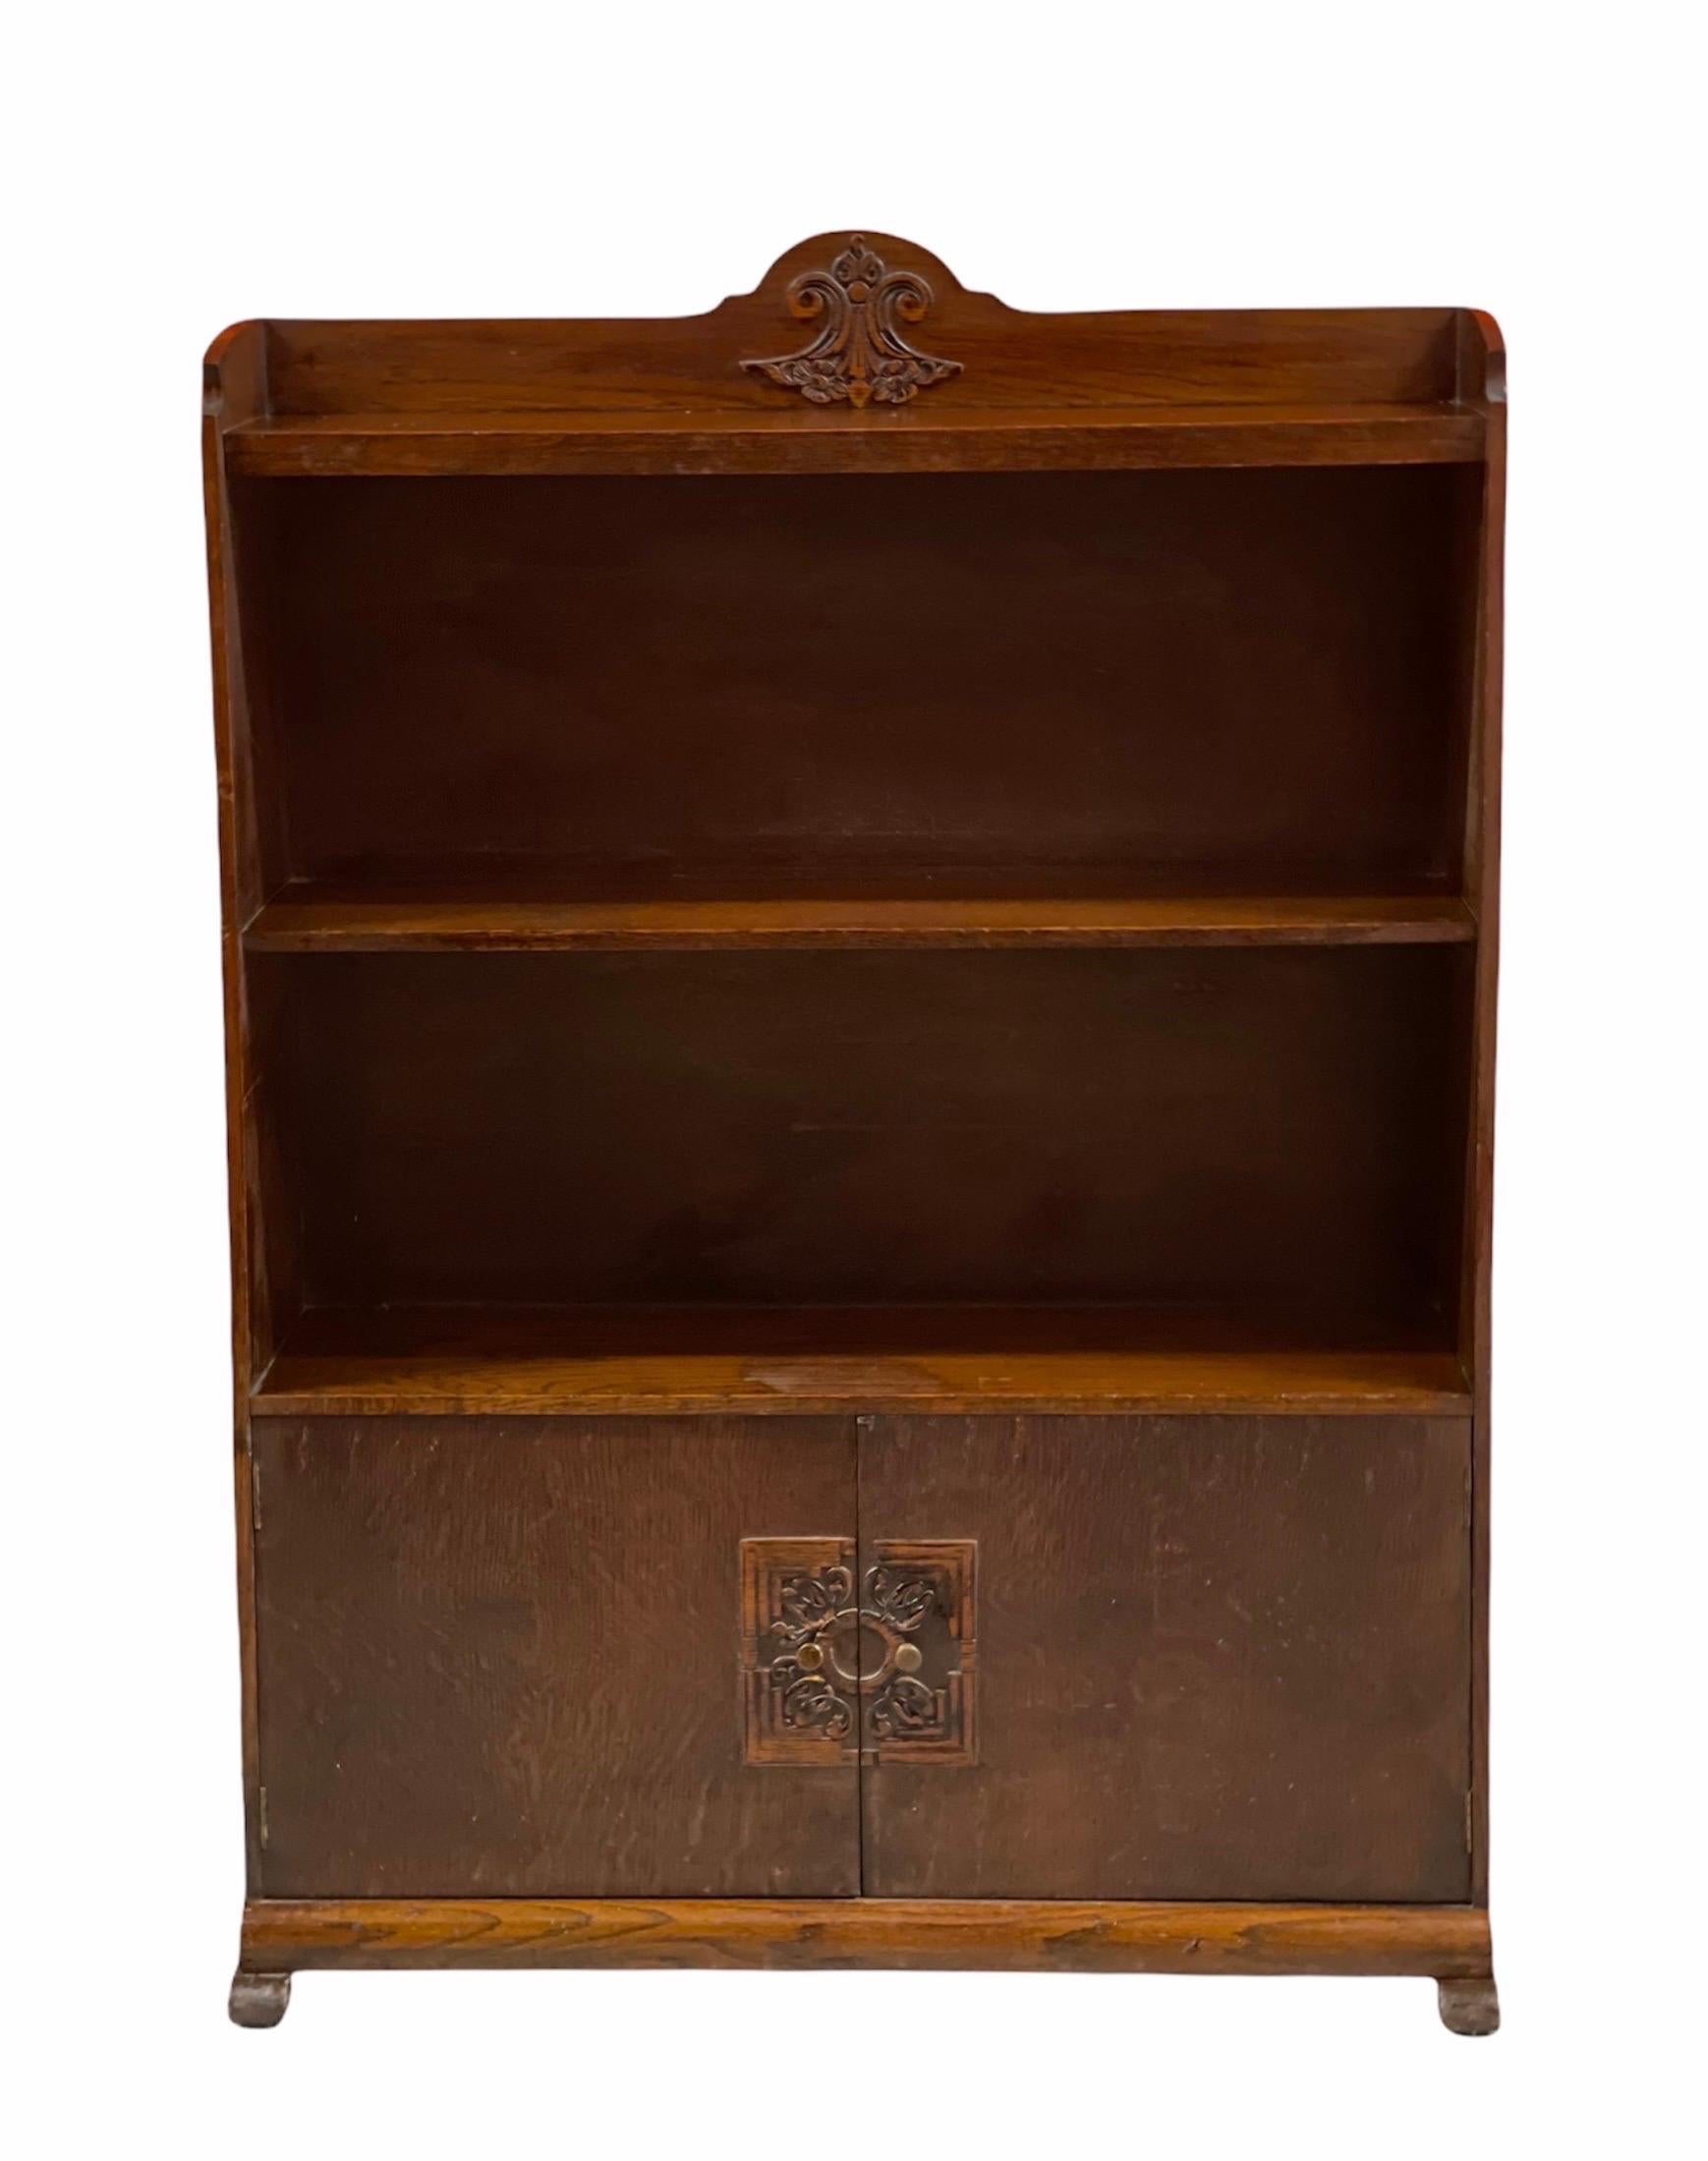 Vintage English Book Case Cabinet. Vintage wear as Pictured.

Dimensions. 30 W ; 11 D ; 42 H